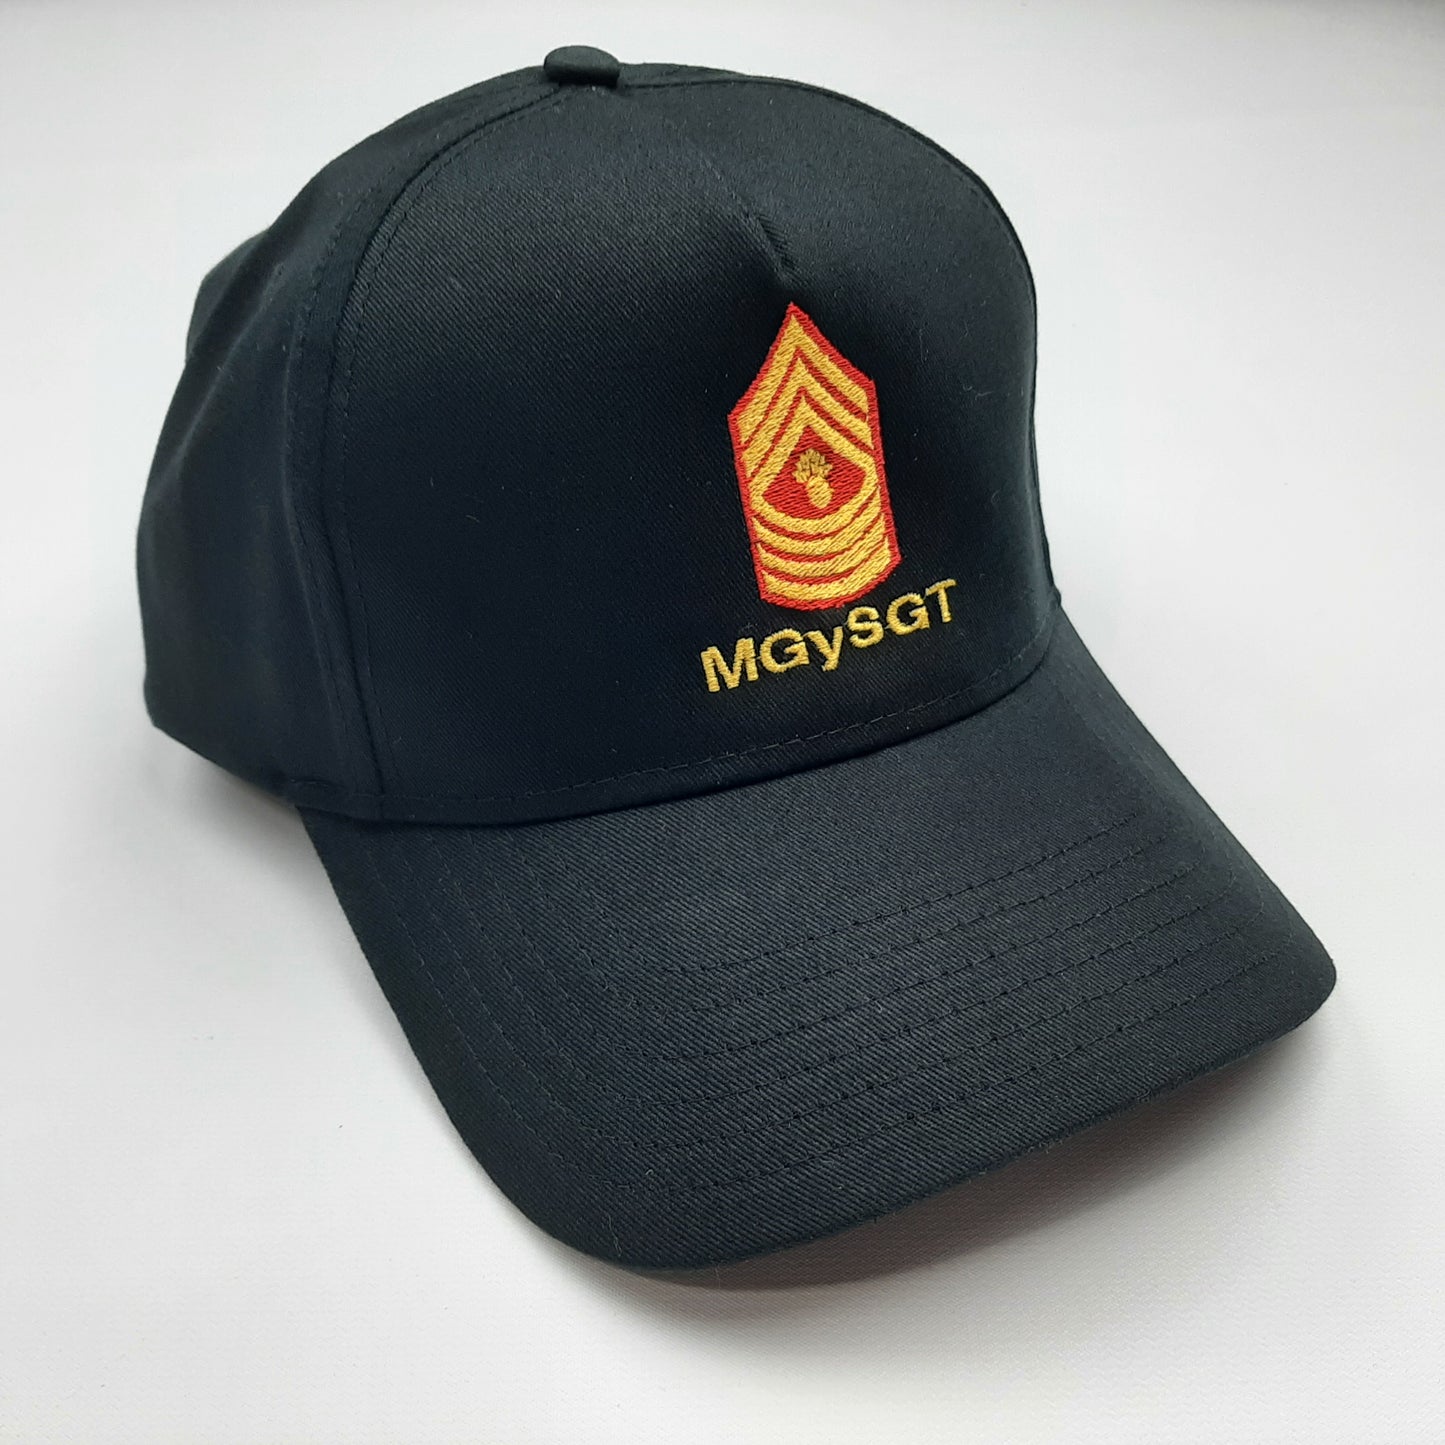 MGYSGT Master Gunnery Sergeant Men's Ball Cap Hat Black Embroidered Cotton